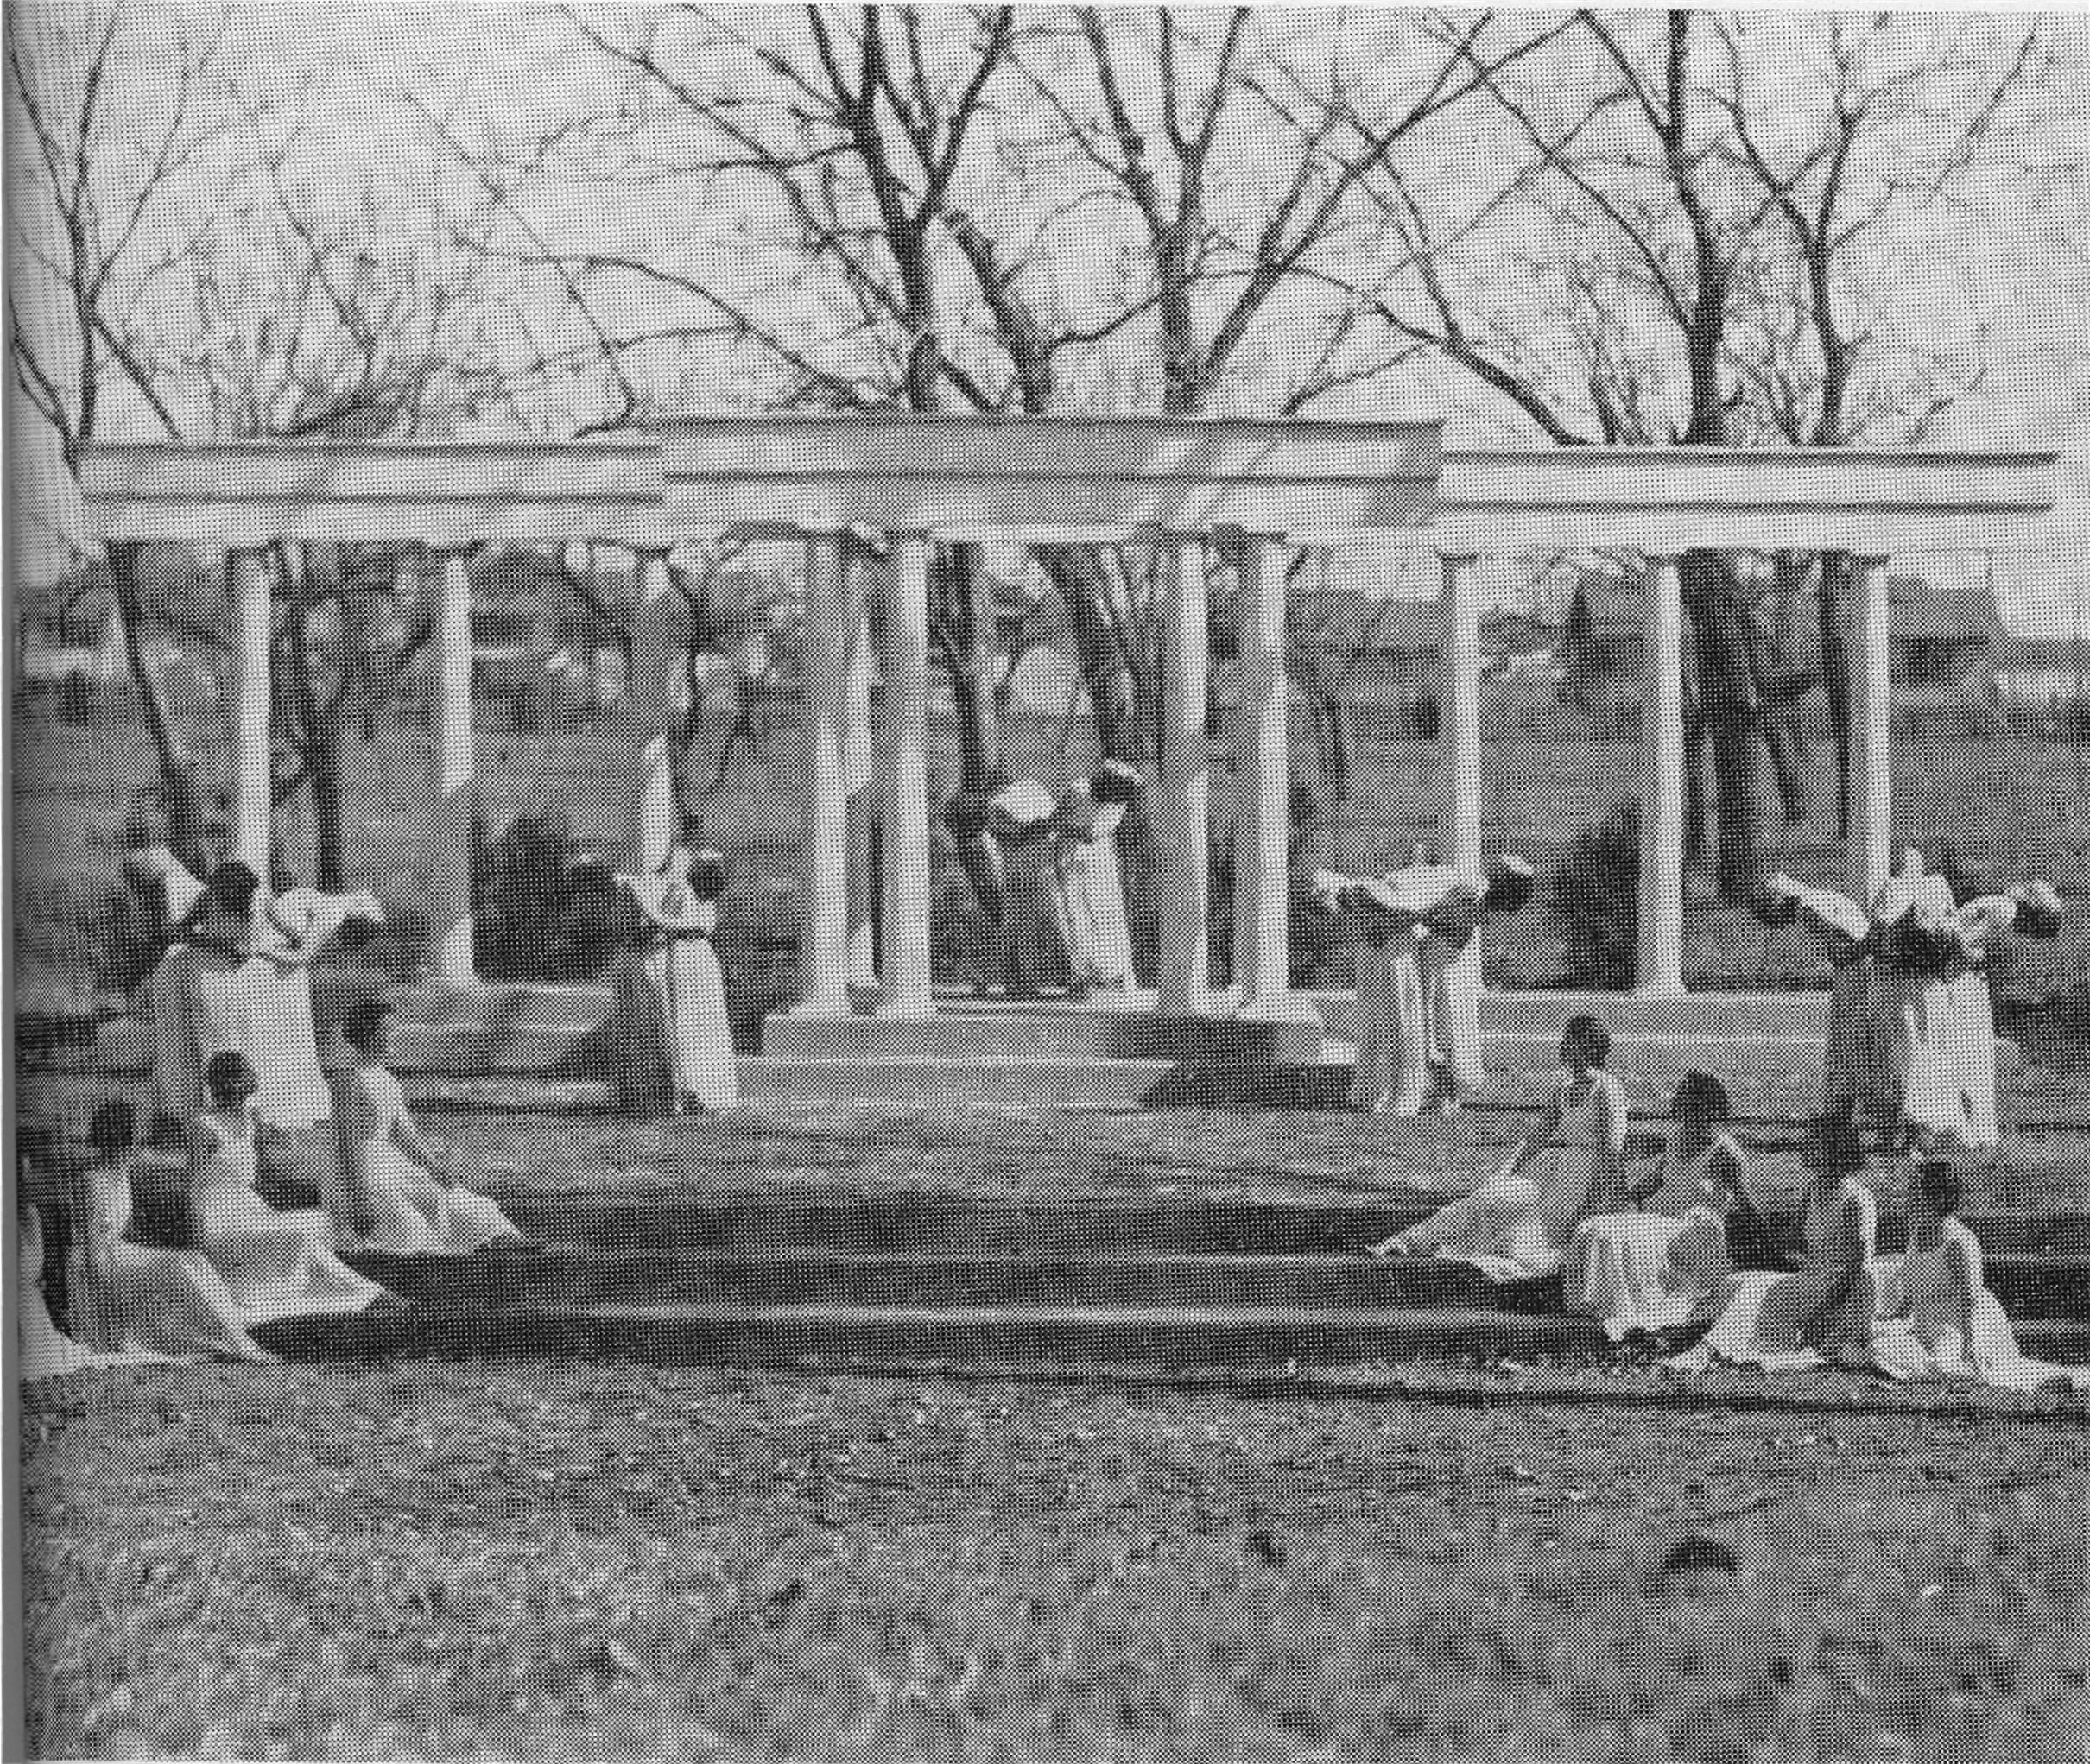 Black and white image of USAO's Greek Theater in 1934